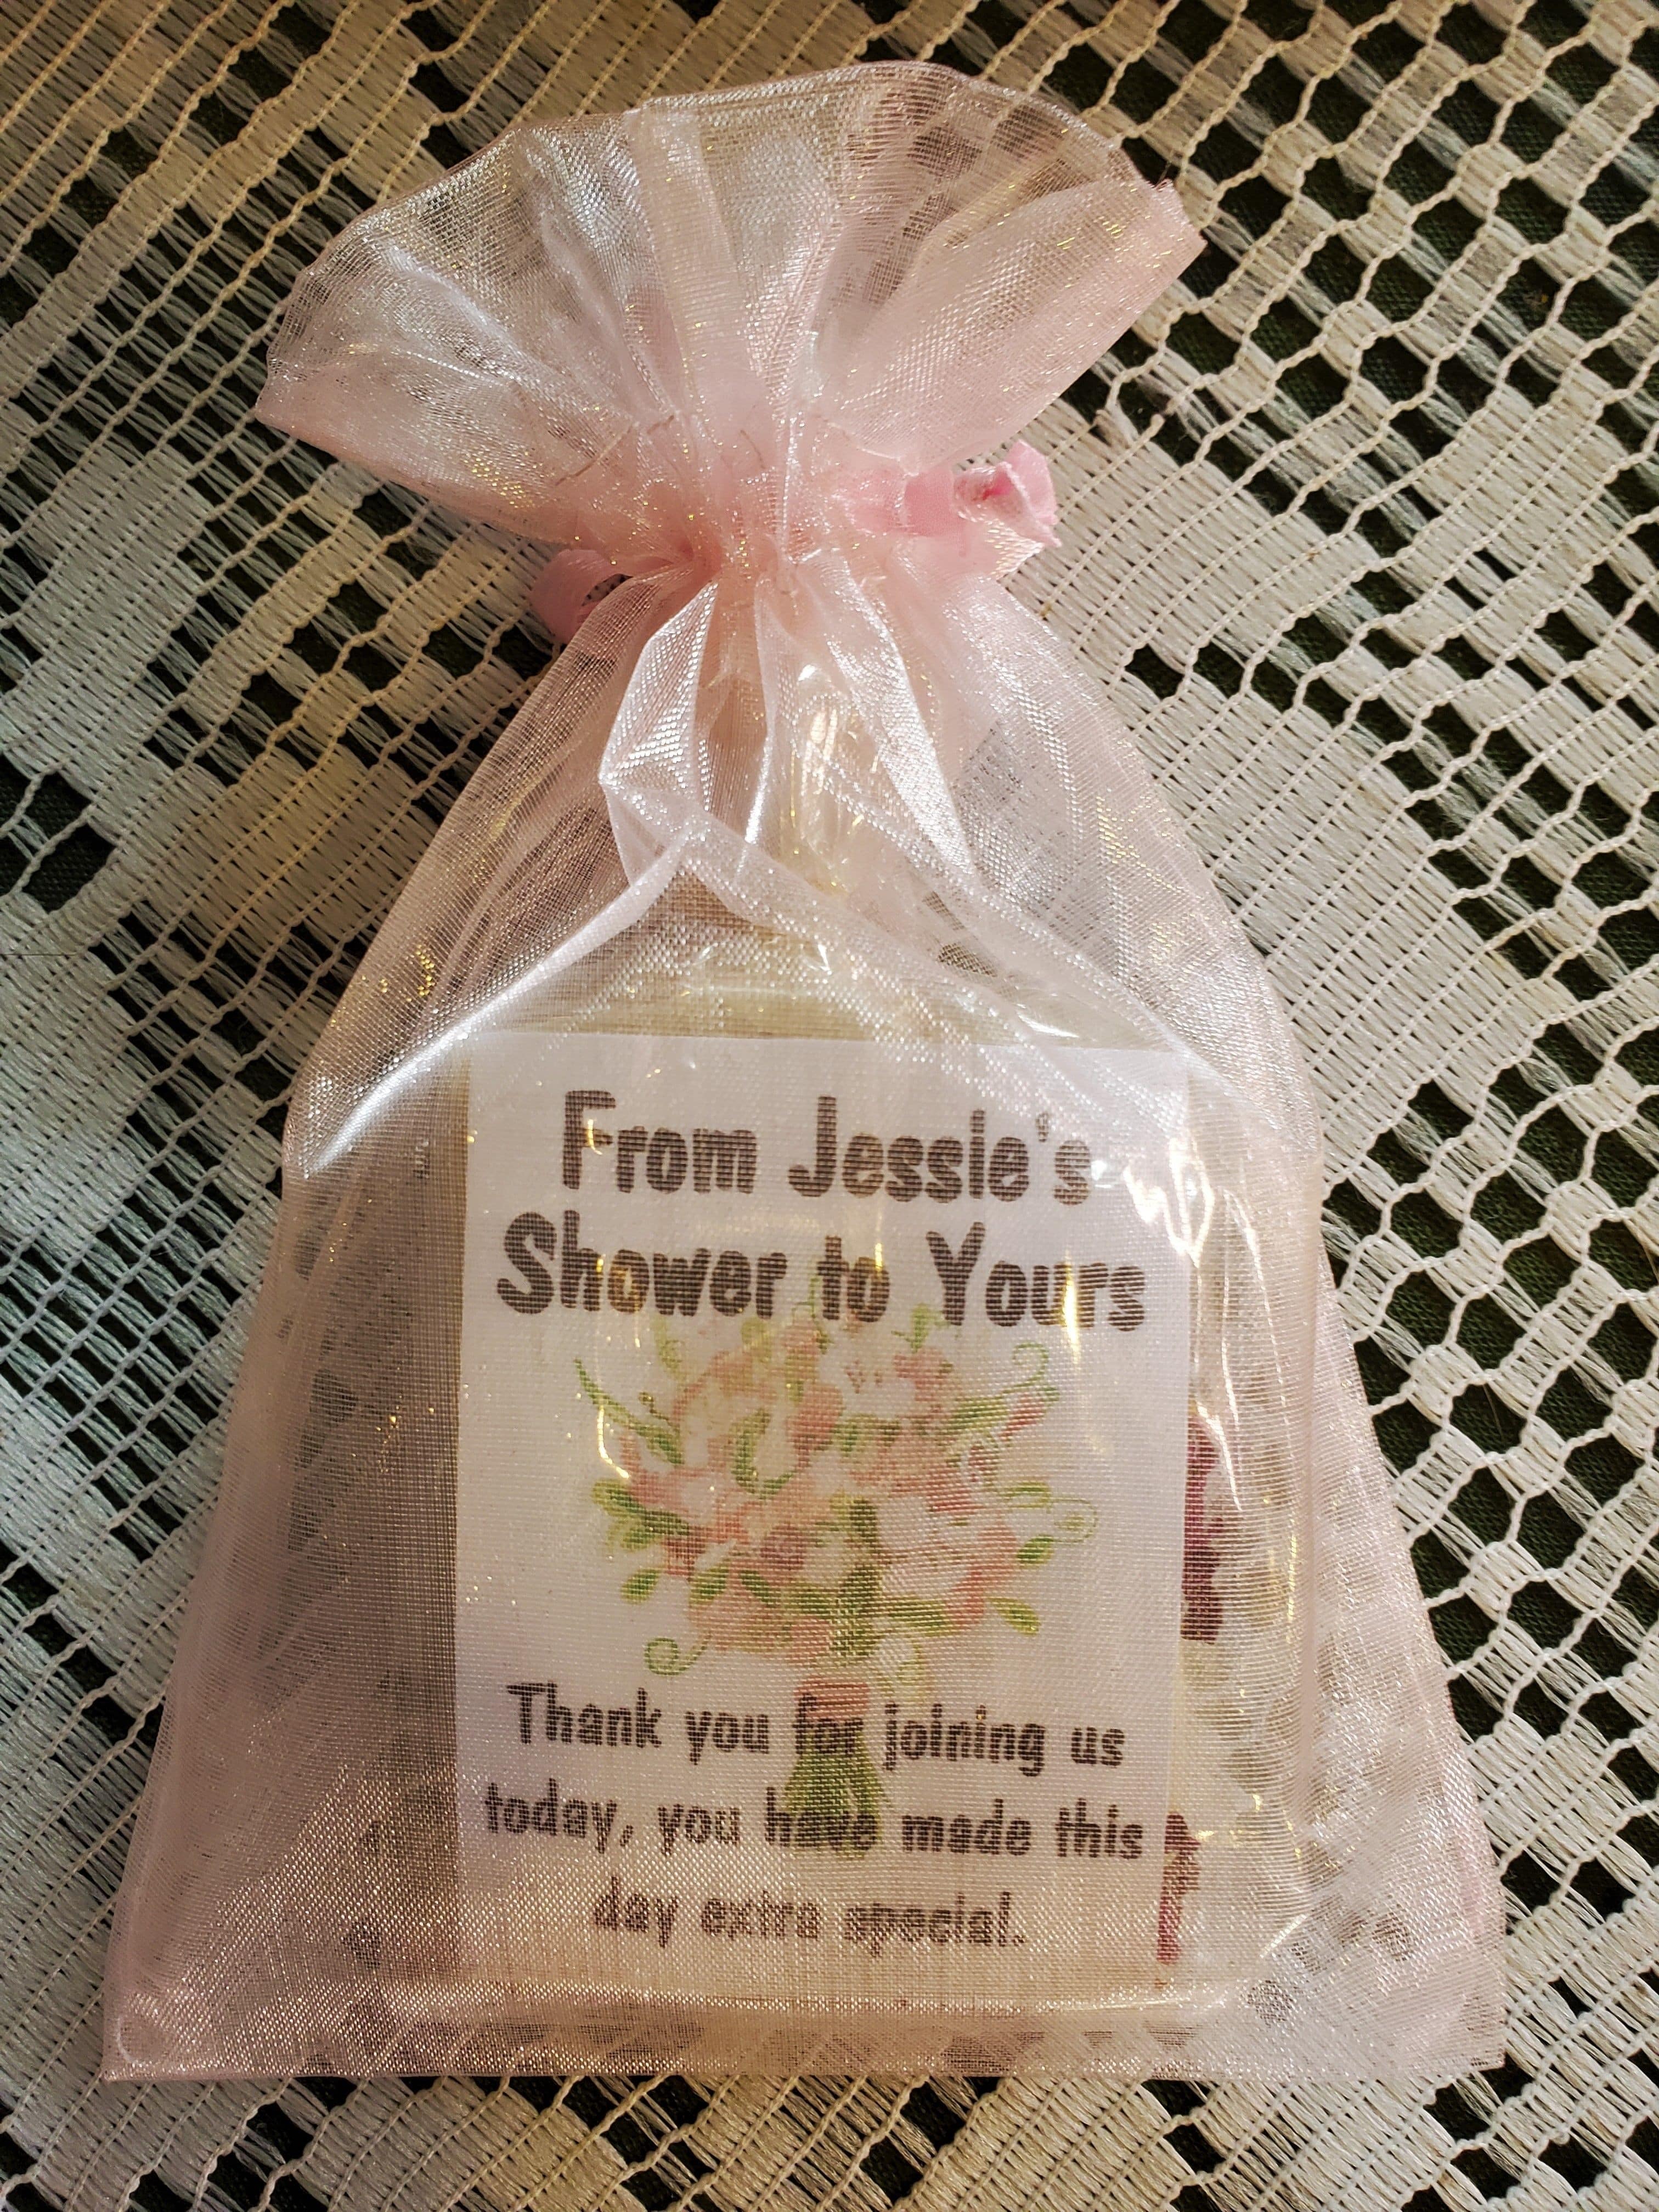 Our handmade, all natural soap favours are customized for bridal showers and wedding day guest gifts.  A premium reasonably priced Canadian soap gift.